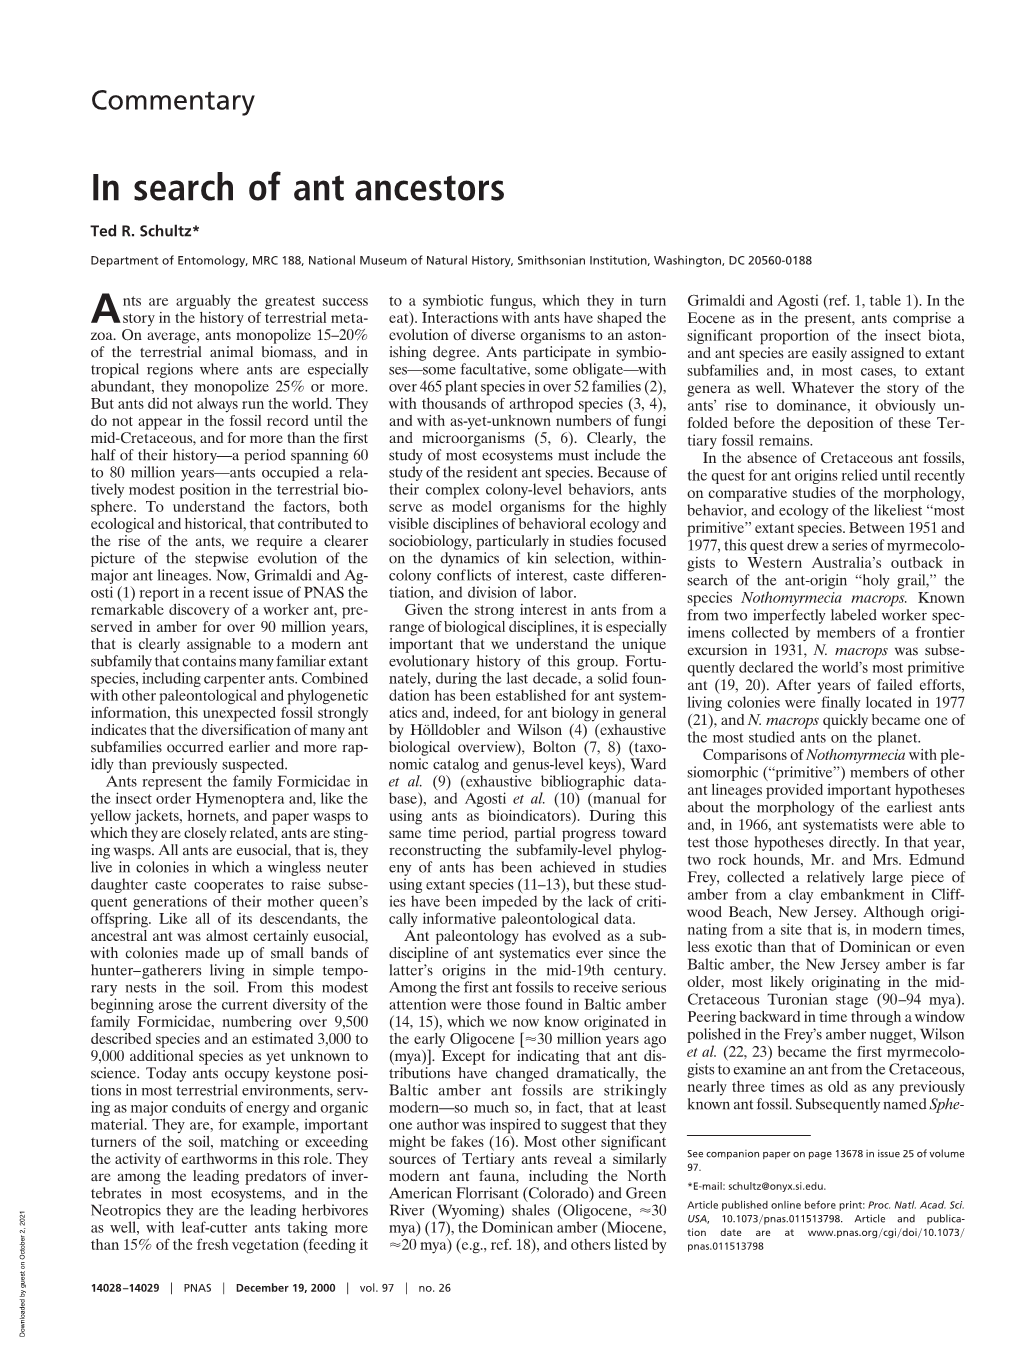 In Search of Ant Ancestors